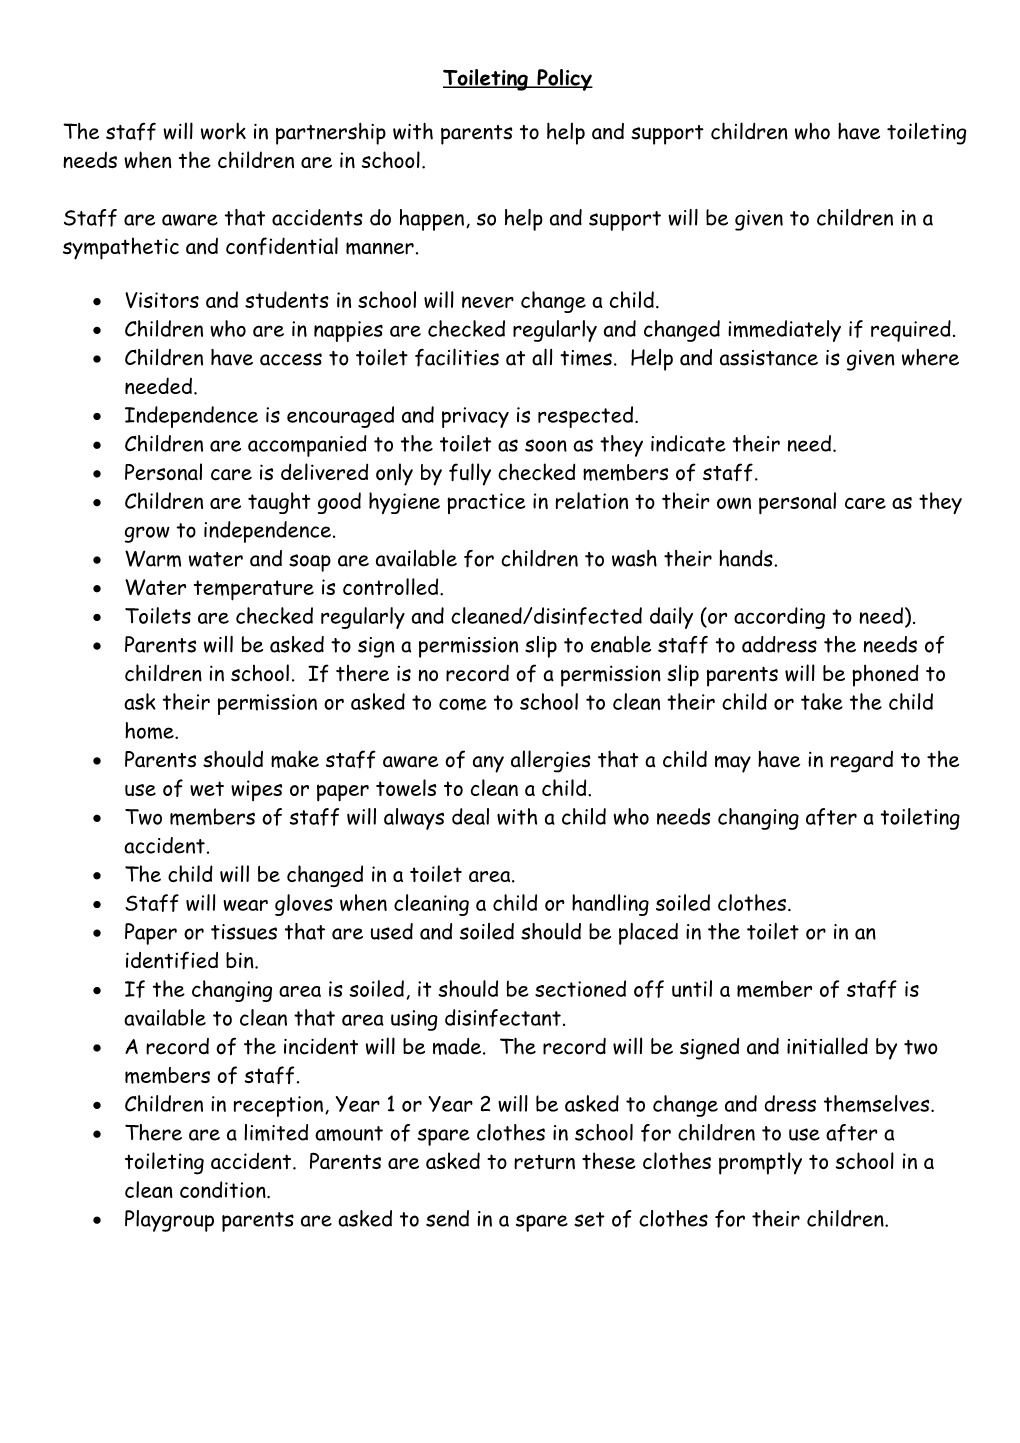 Little Gems /Victoria Infant School Toileting Policy